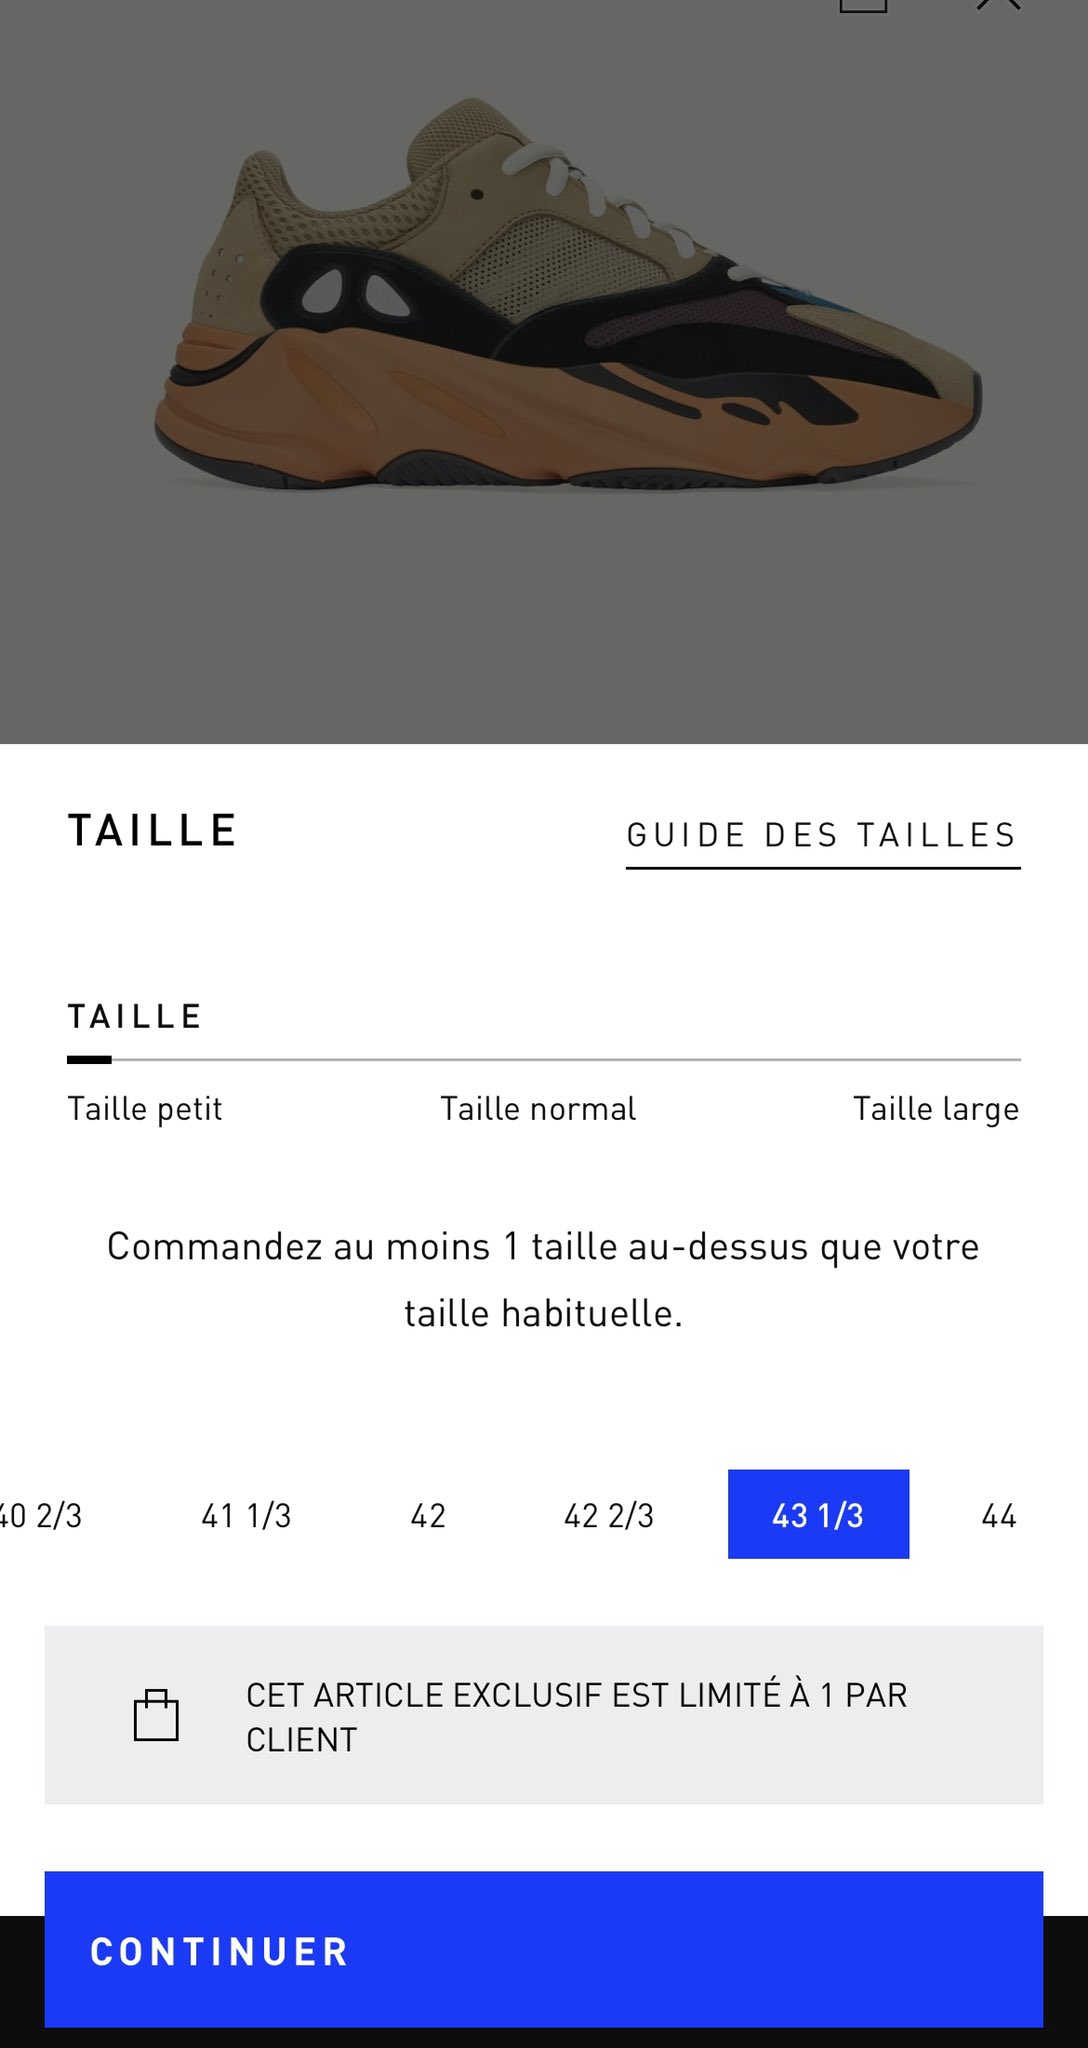 MoreSneakers.com on "Check adidas EU App for Yeezy exclusive access https://t.co/eVNz02Wubl" /